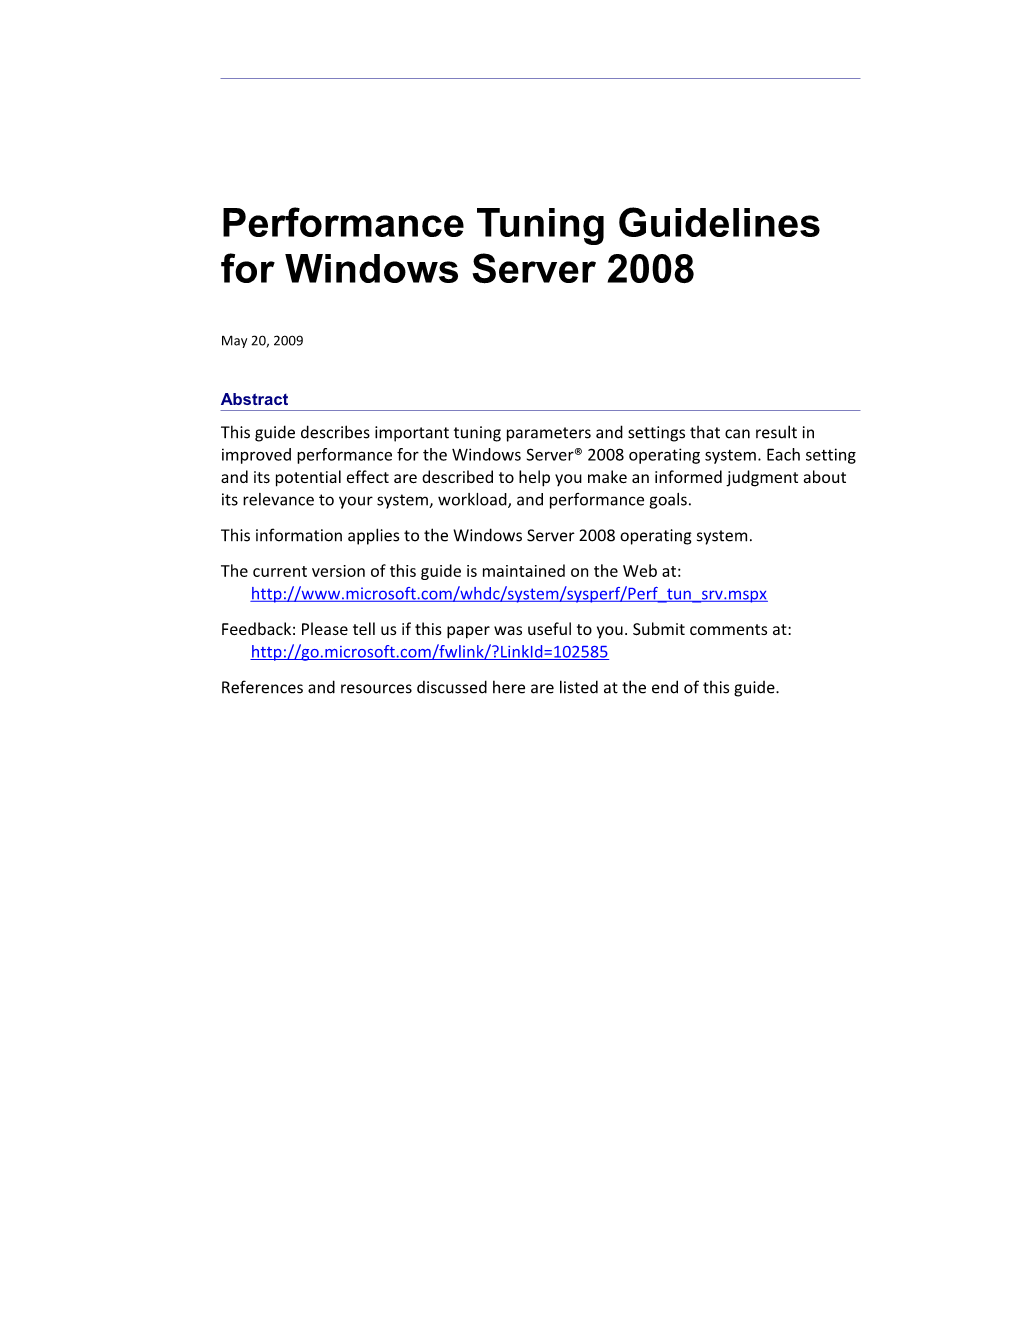 Performance Tuning Guidelines for Windows Server 2008 - 1